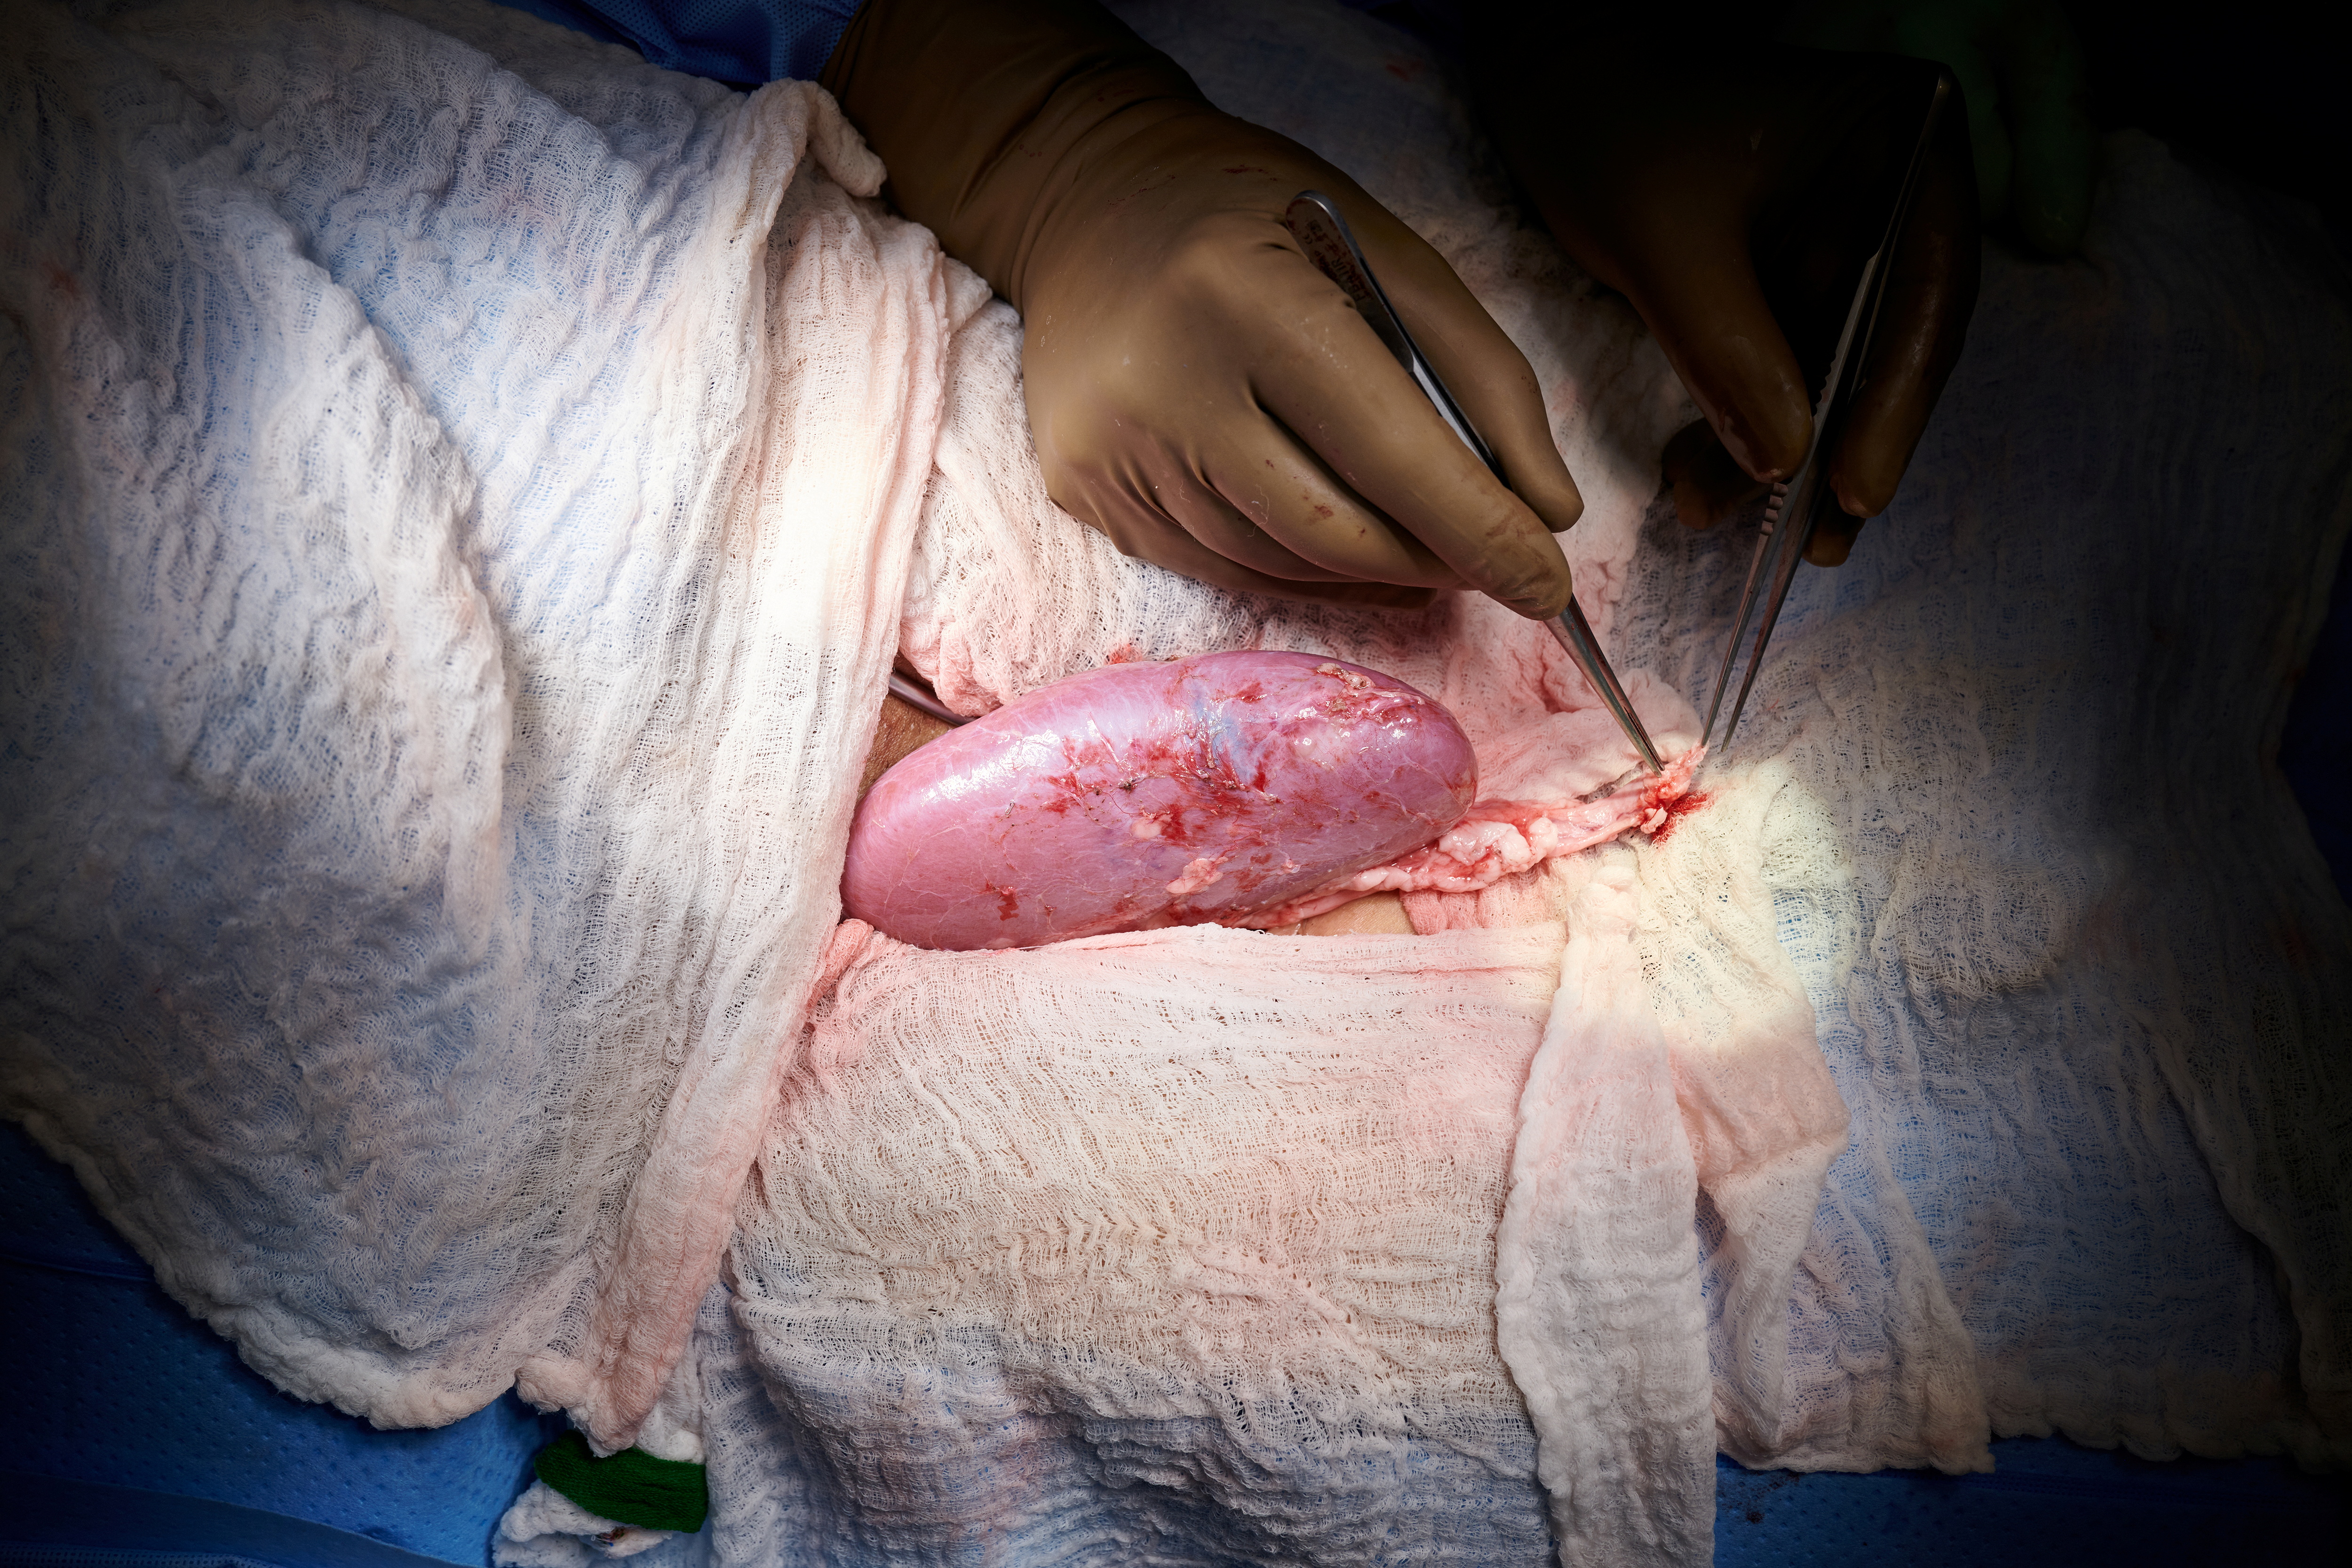 A genetically engineered pig kidney appears healthy during a transplant operation at NYU Langone in New York, U.S., in this undated handout photo. Joe Carrotta for NYU Langone Health/Handout via REUTERS  .